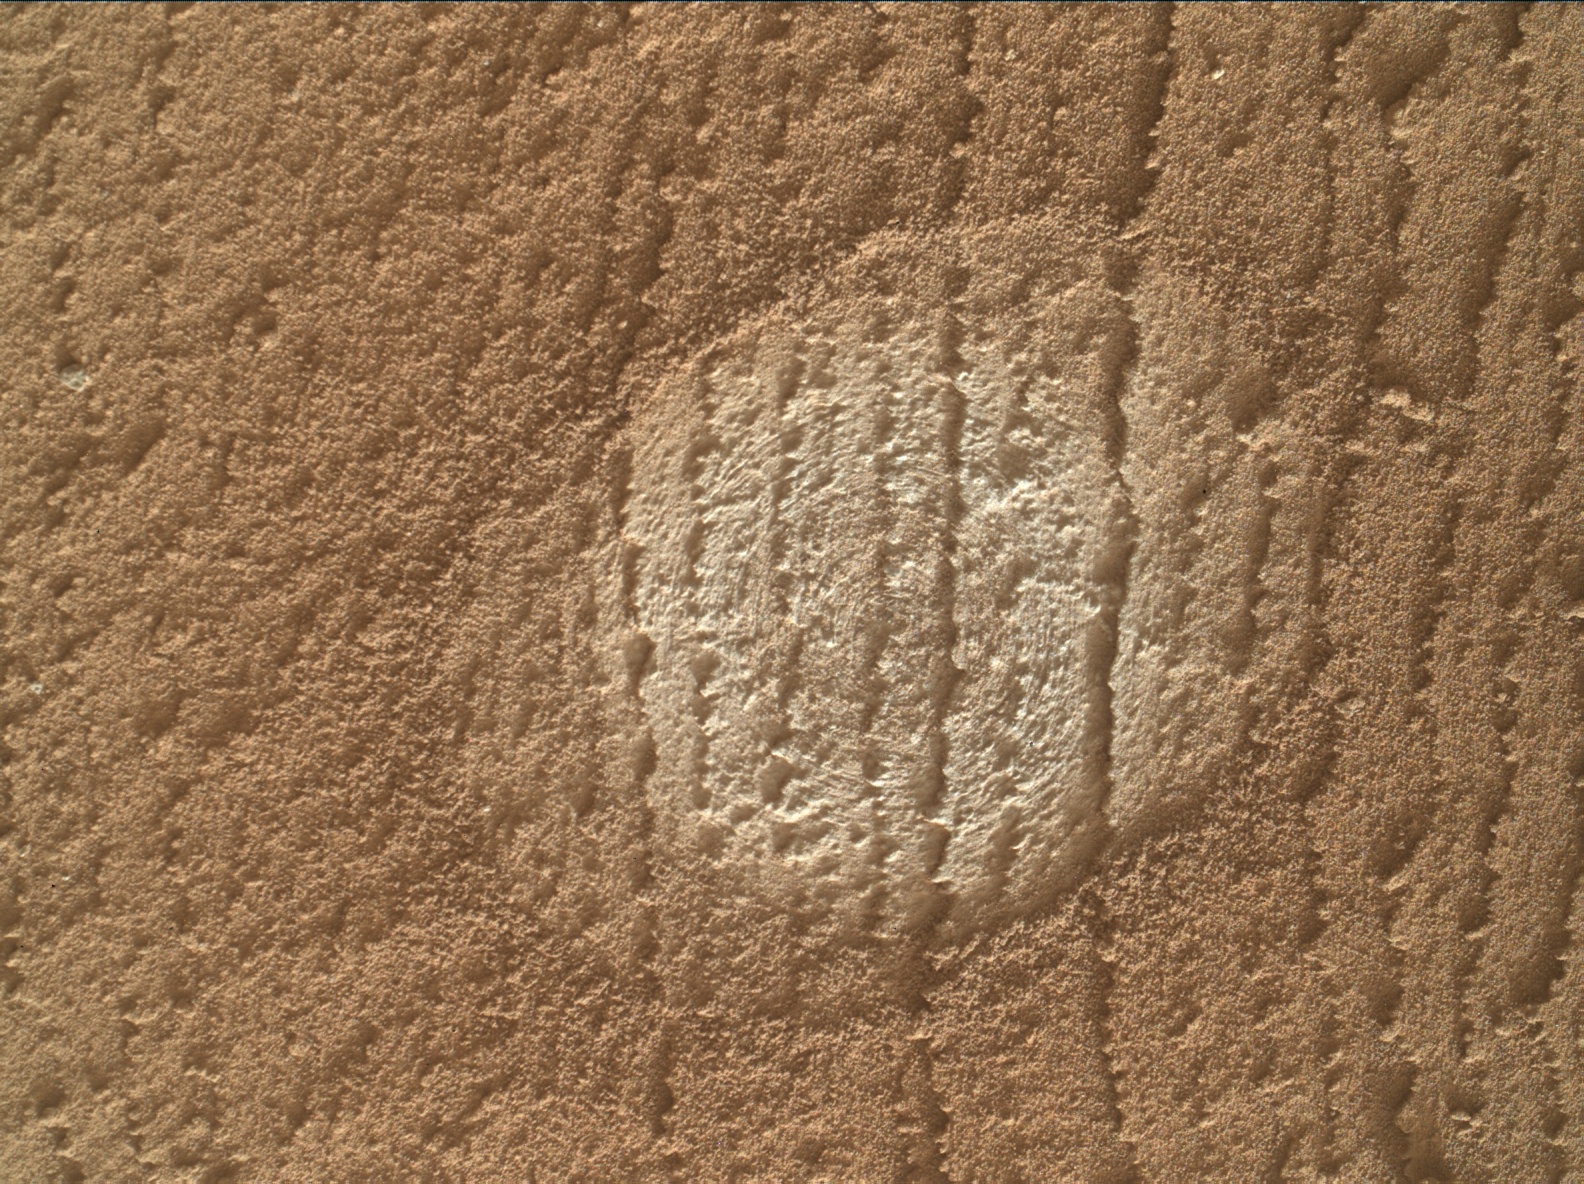 Nasa's Mars rover Curiosity acquired this image using its Mars Hand Lens Imager (MAHLI) on Sol 3773